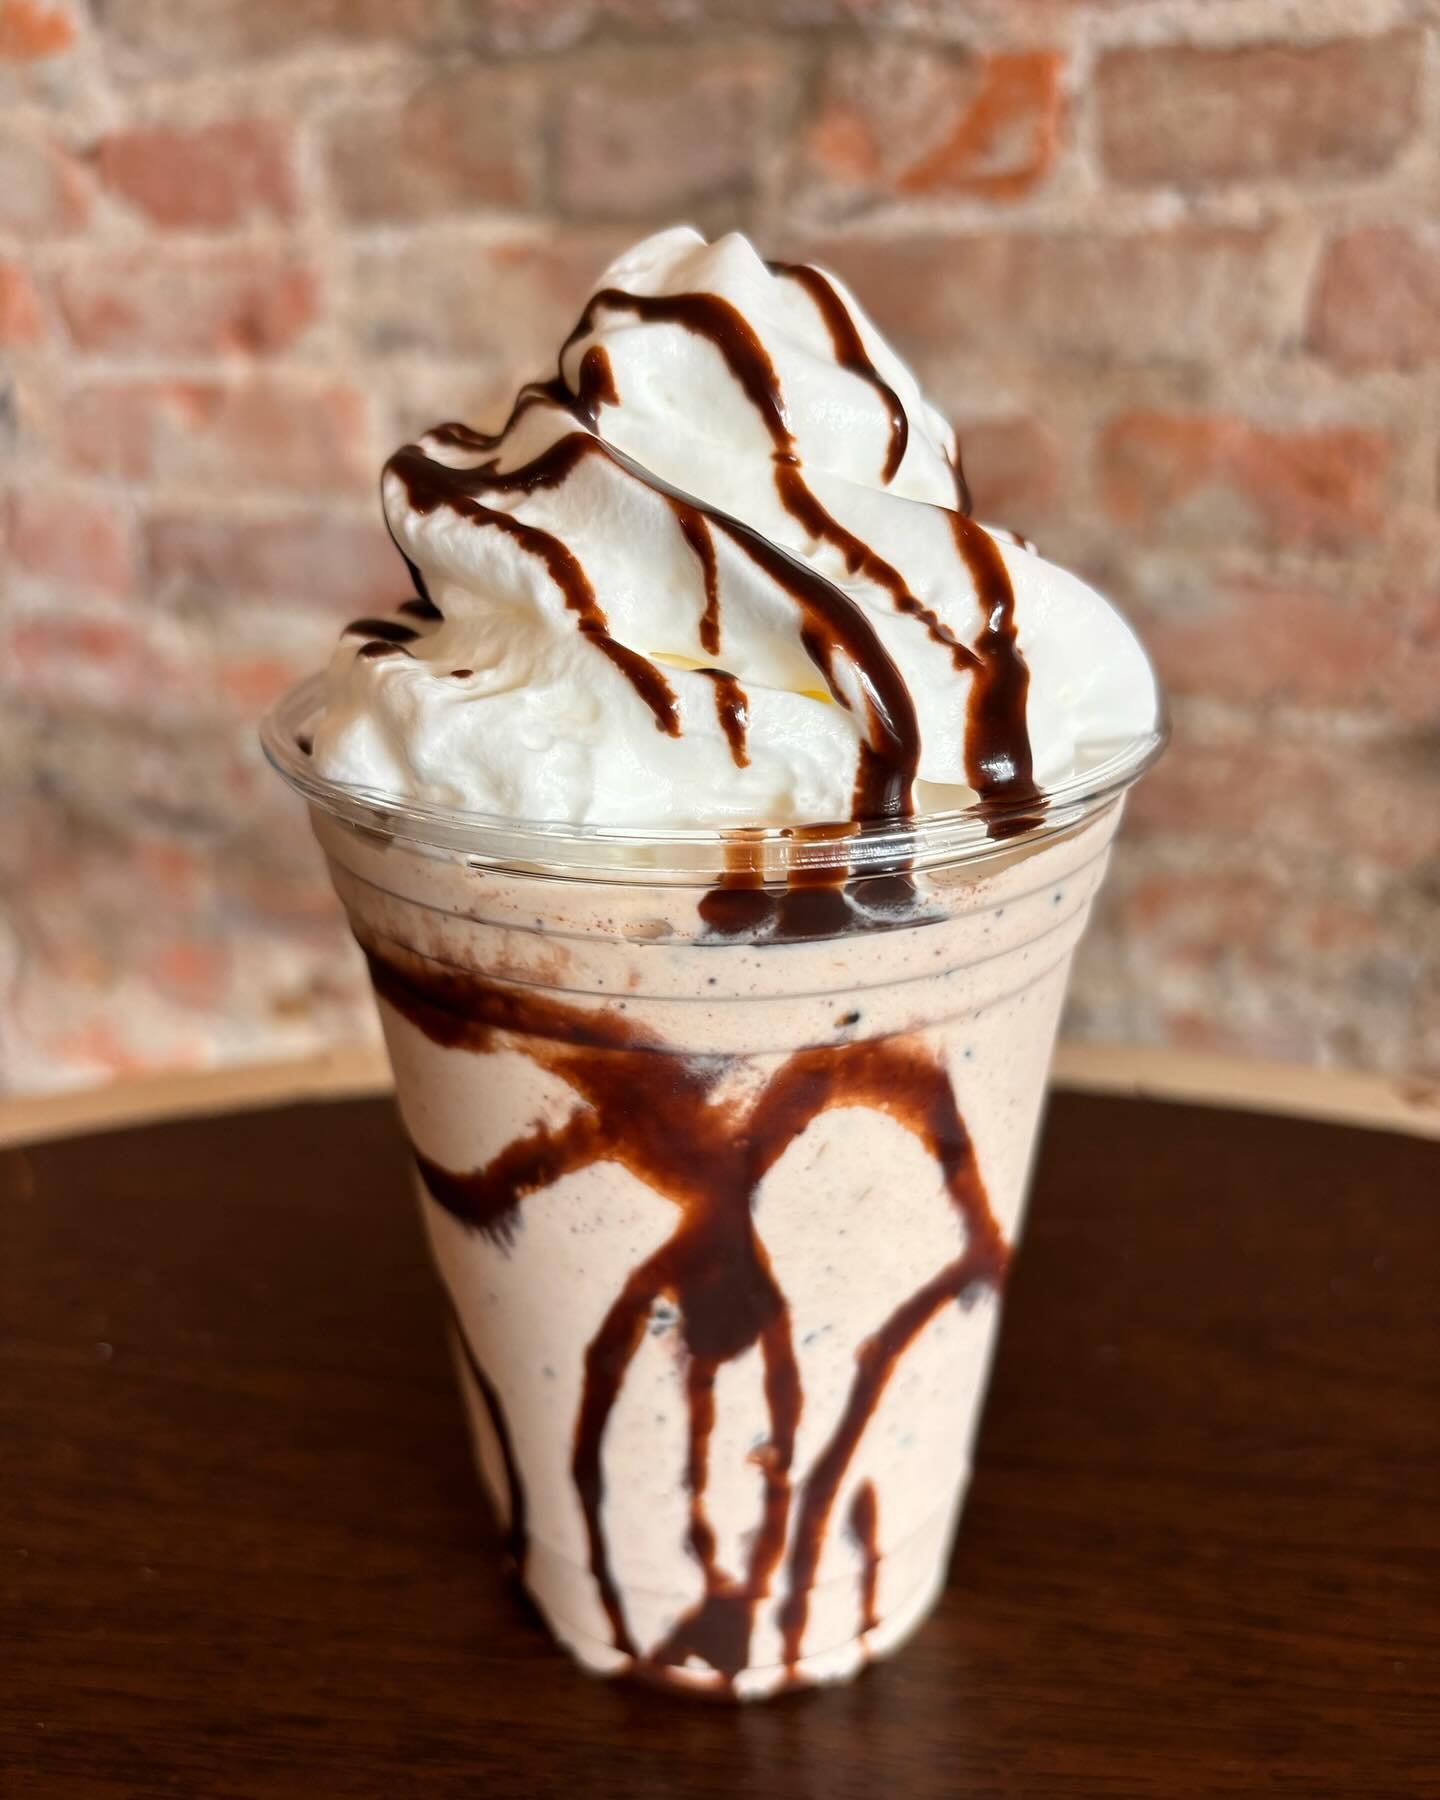 What&rsquo;s shakin&rsquo;? We&rsquo;re open &lsquo;til 8 tonight for all of your milkshake wants and needs. See you soon🥤